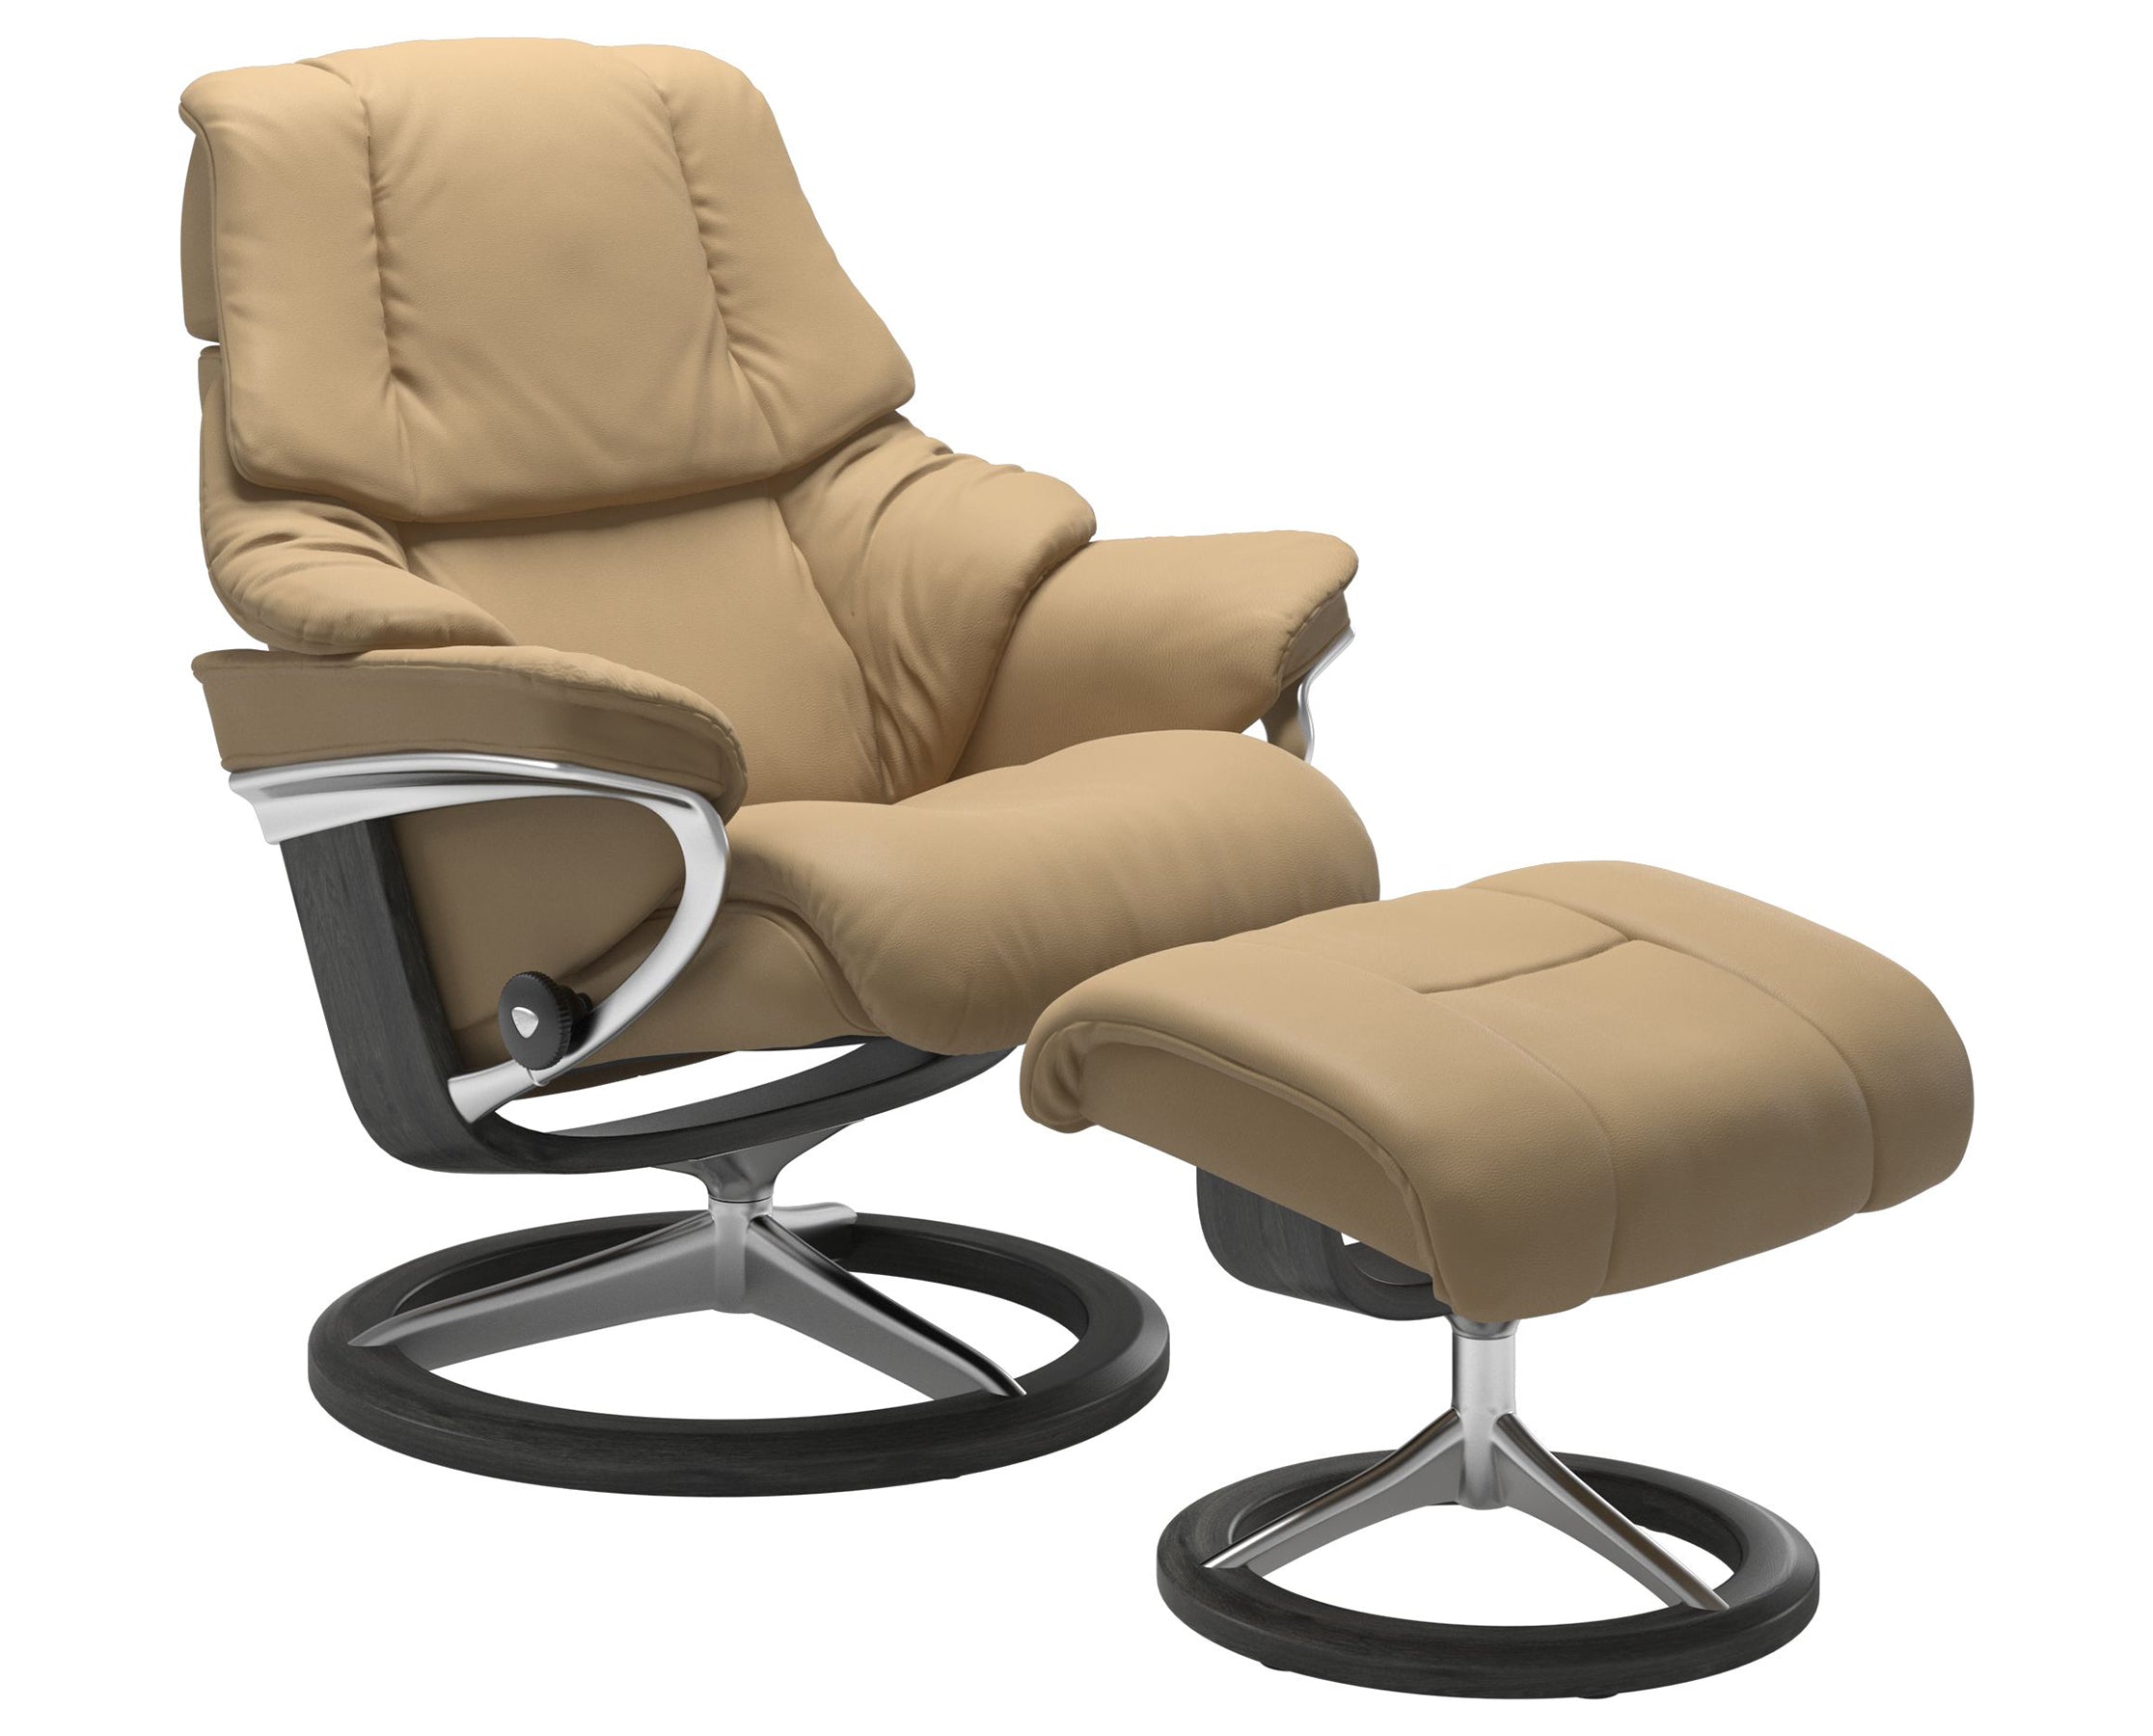 Paloma Leather Sand S/M/L and Grey Base | Stressless Reno Signature Recliner | Valley Ridge Furniture